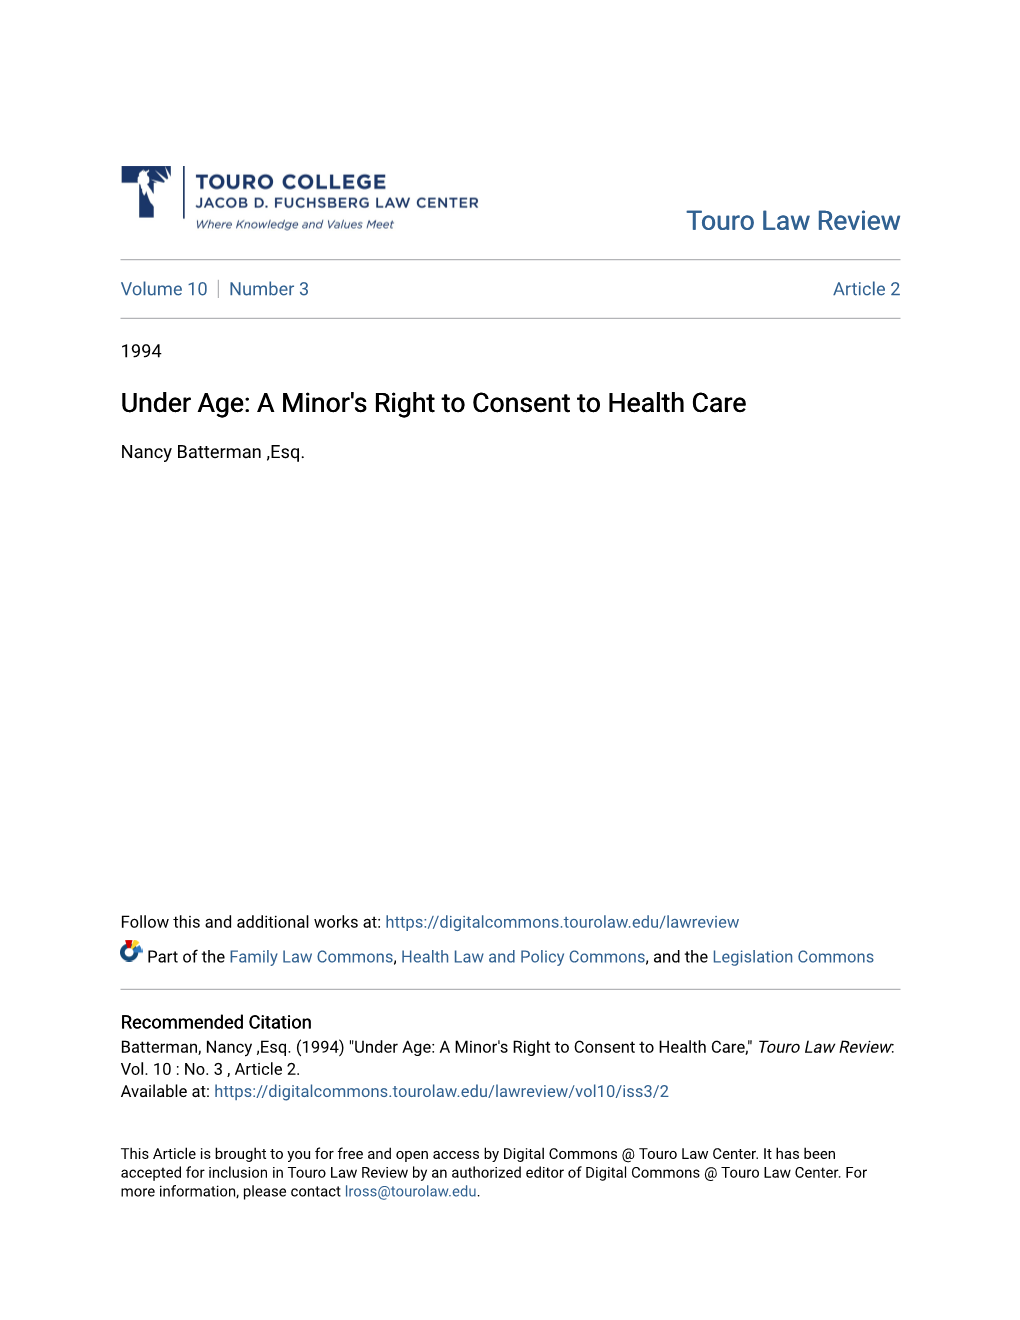 A Minor's Right to Consent to Health Care